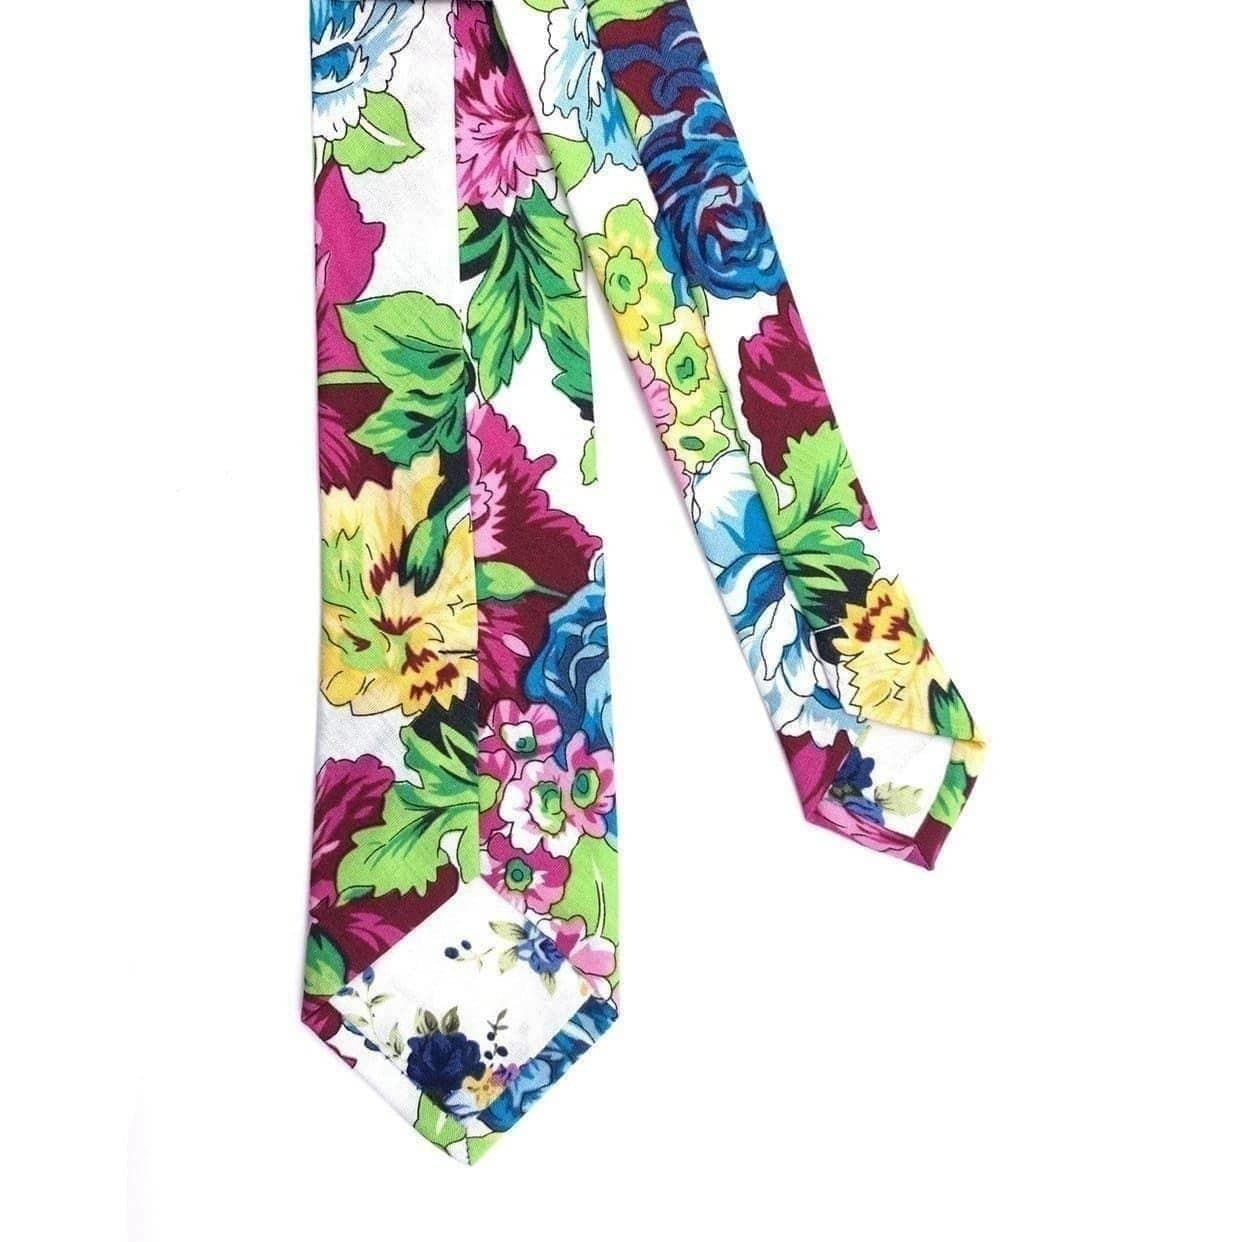 Floral Skinny Tie 2.36 BYRON-Neckties-Floral Skinny TieMen’s Floral Necktie for weddings and events, great for prom and anniversary gifts. Mens floral ties near me us ties tie-Mytieshop. Skinny ties for weddings anniversaries. Father of bride. Groomsmen. Cool skinny neckties for men. Neckwear for prom, missions and fancy events. Gift ideas for men. Anniversaries ideas. Wedding aesthetics. Flower ties. Dry flower ties.